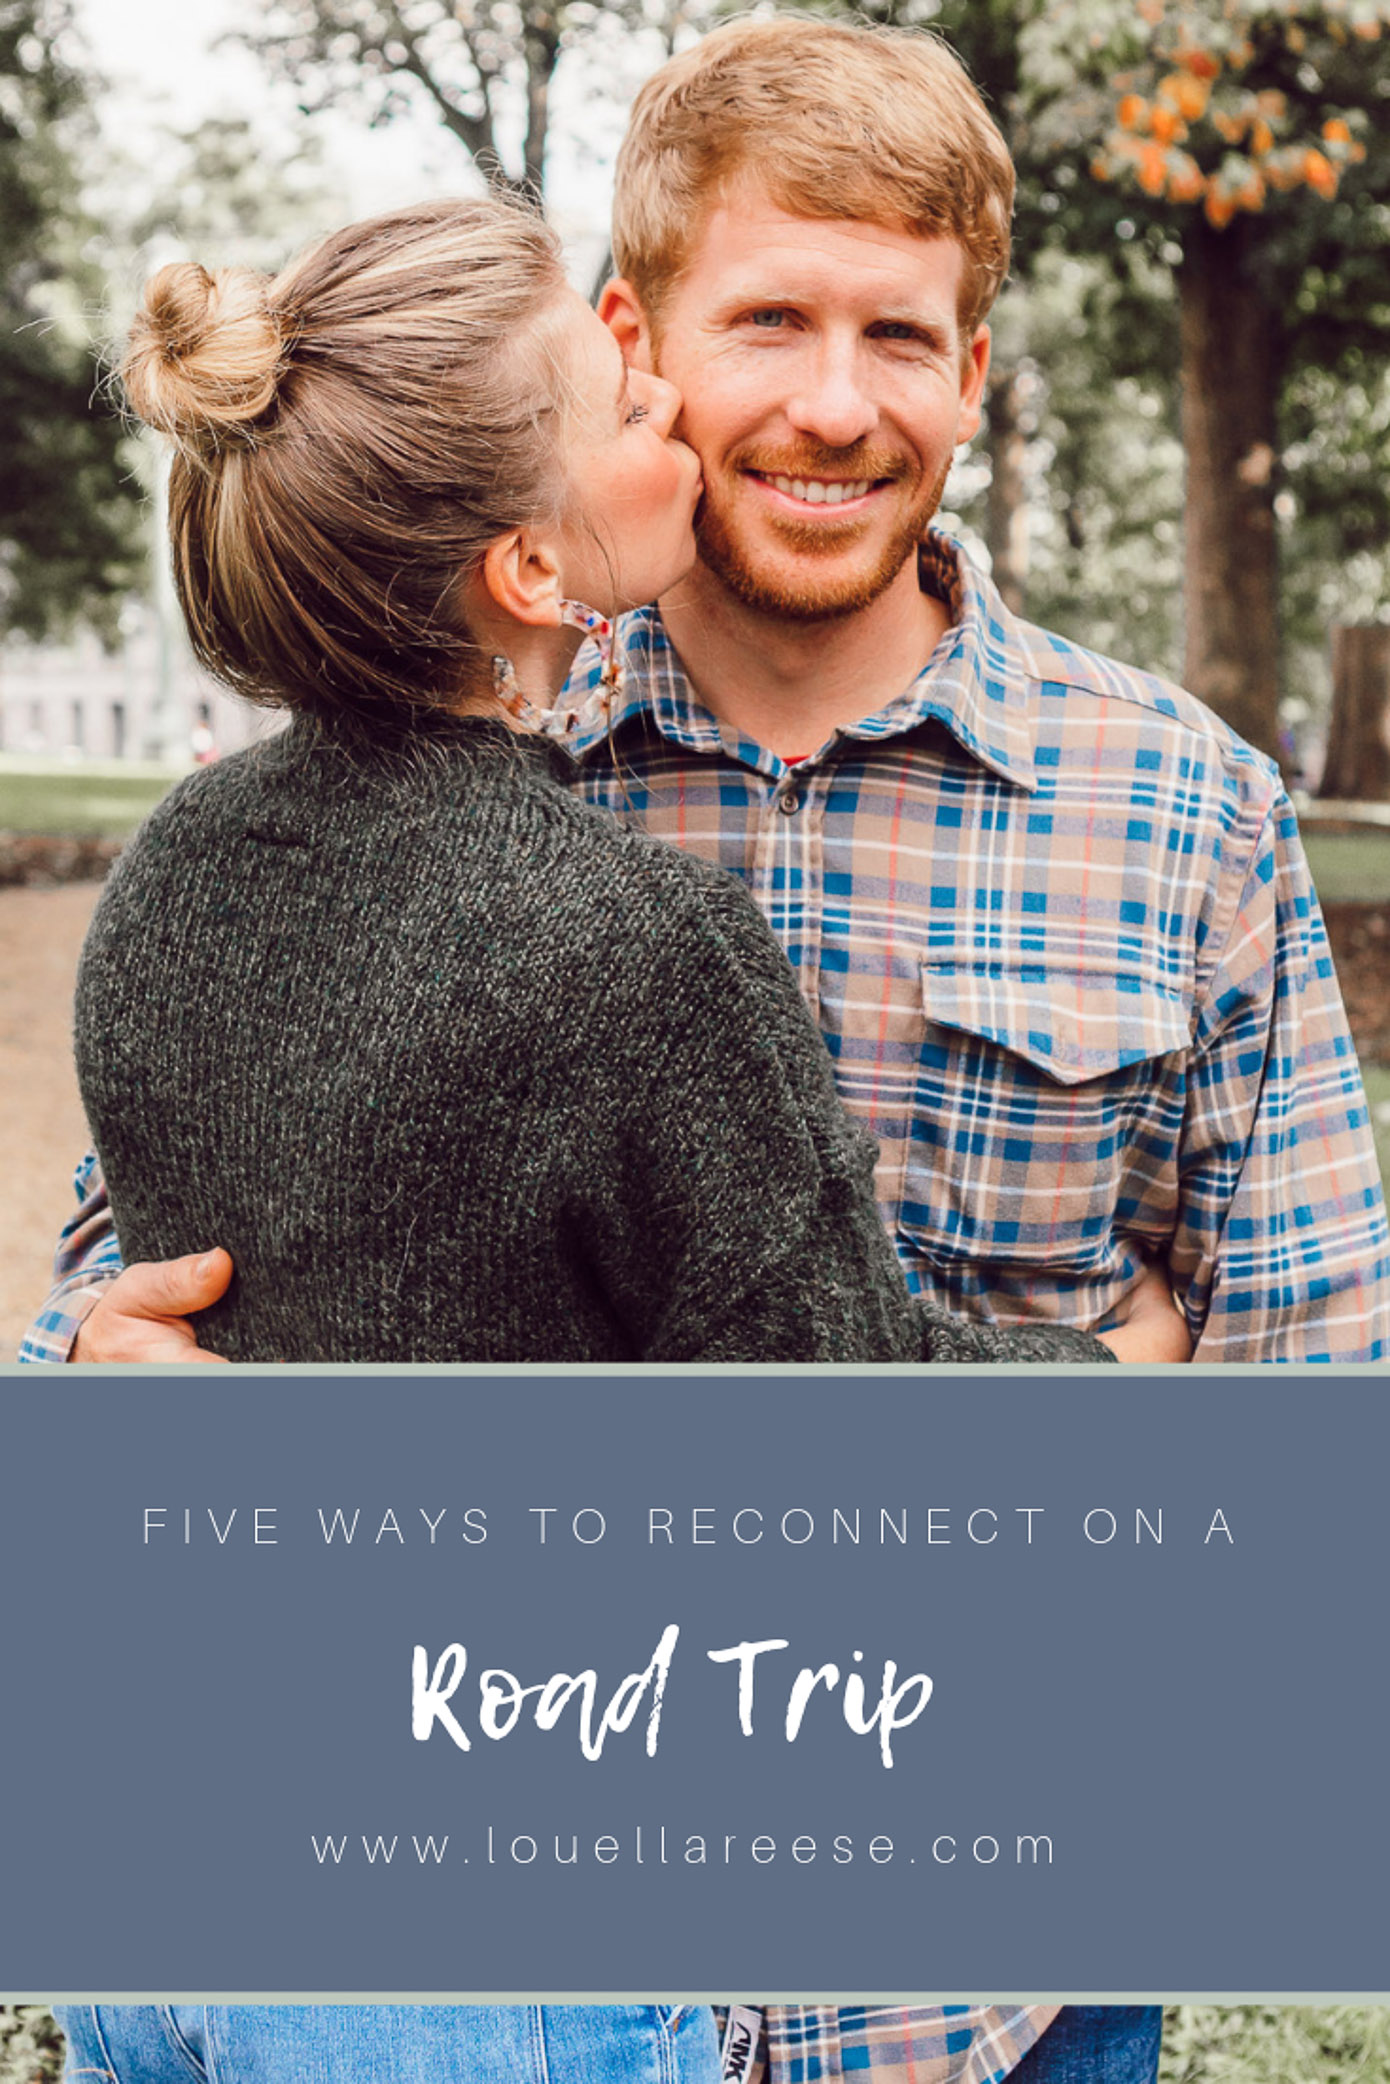 Five Ways to Reconnect on a Road Trip featured on Louella Reese